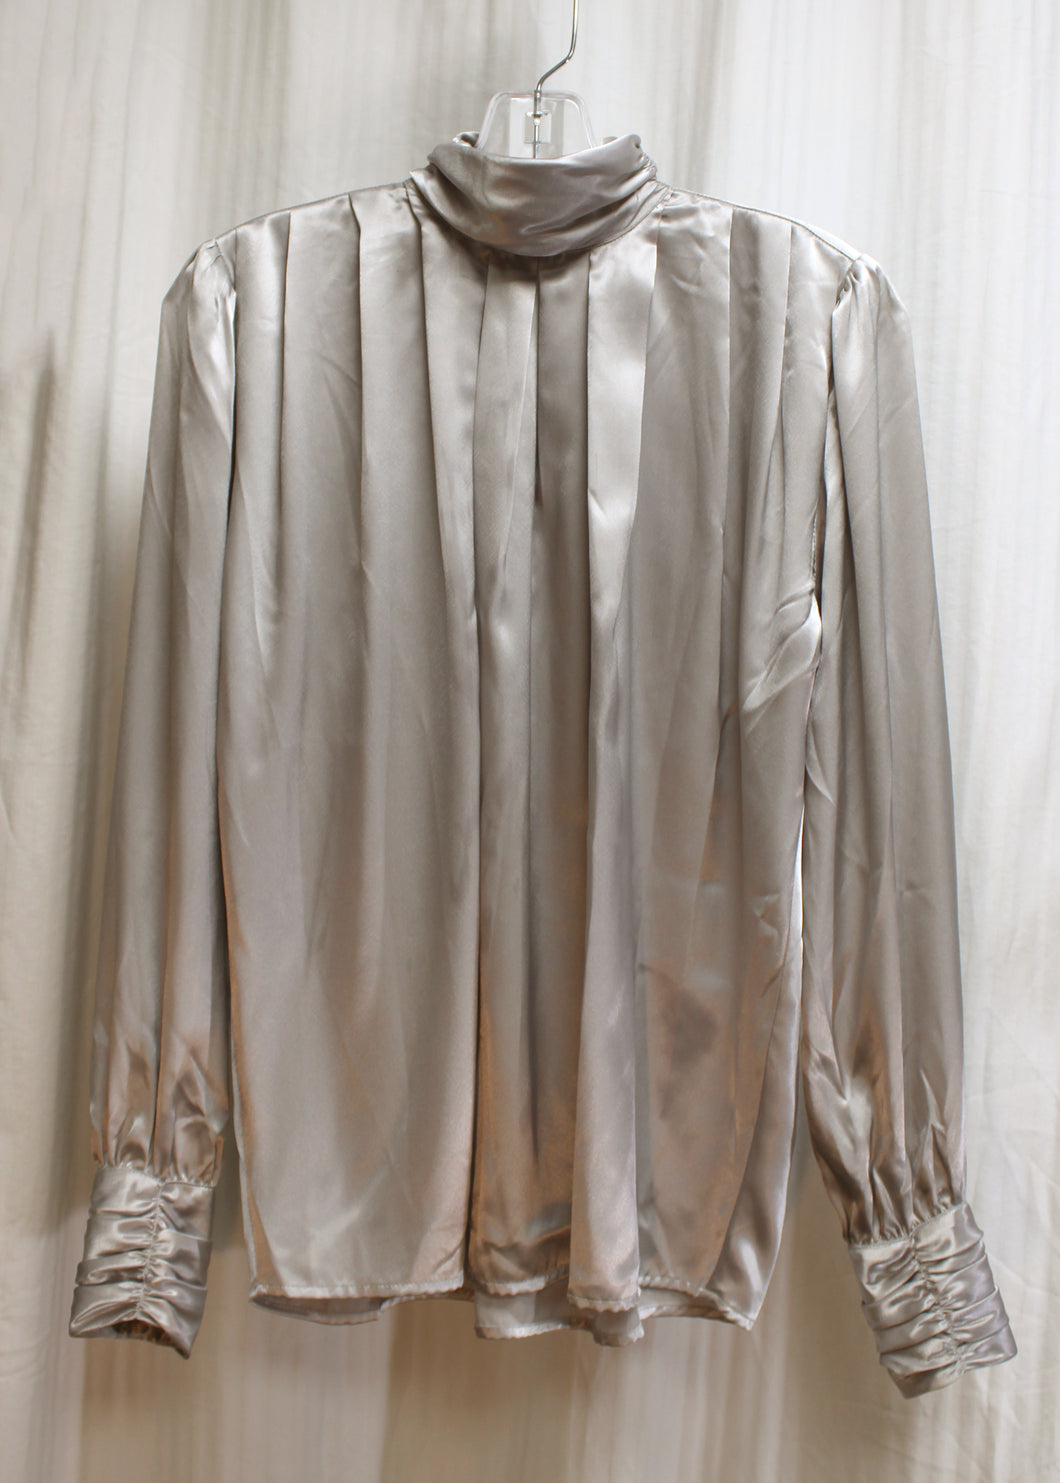 Vintage - Concepts by Caren - Silver Silky Lightweight High Neck Pleated Blouse - Size 6 (See Measurements)